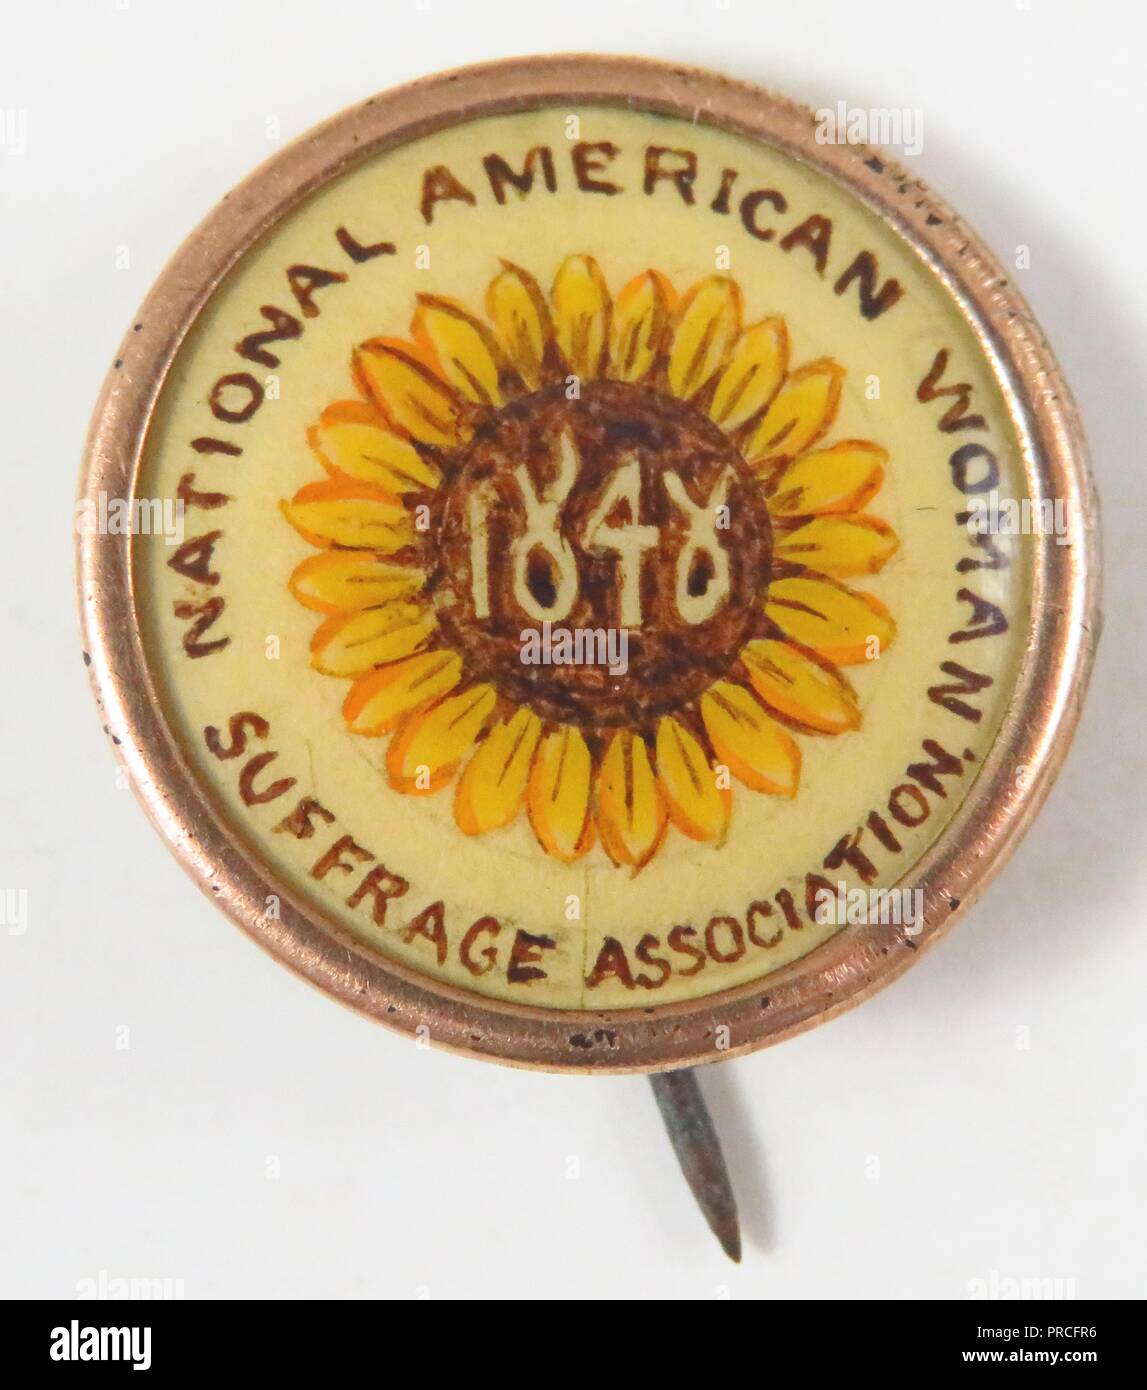 Yellow, brown, and cream suffrage pin, with the year '1848' (commemorating the date of the Seneca Falls Convention) inscribed to the center of a Kansas sunflower, and the text 'National American Woman Suffrage Association, ' manufactured for the American market by the National American Woman Suffrage Association, 1896. Photography by Emilia van Beugen. () Stock Photo